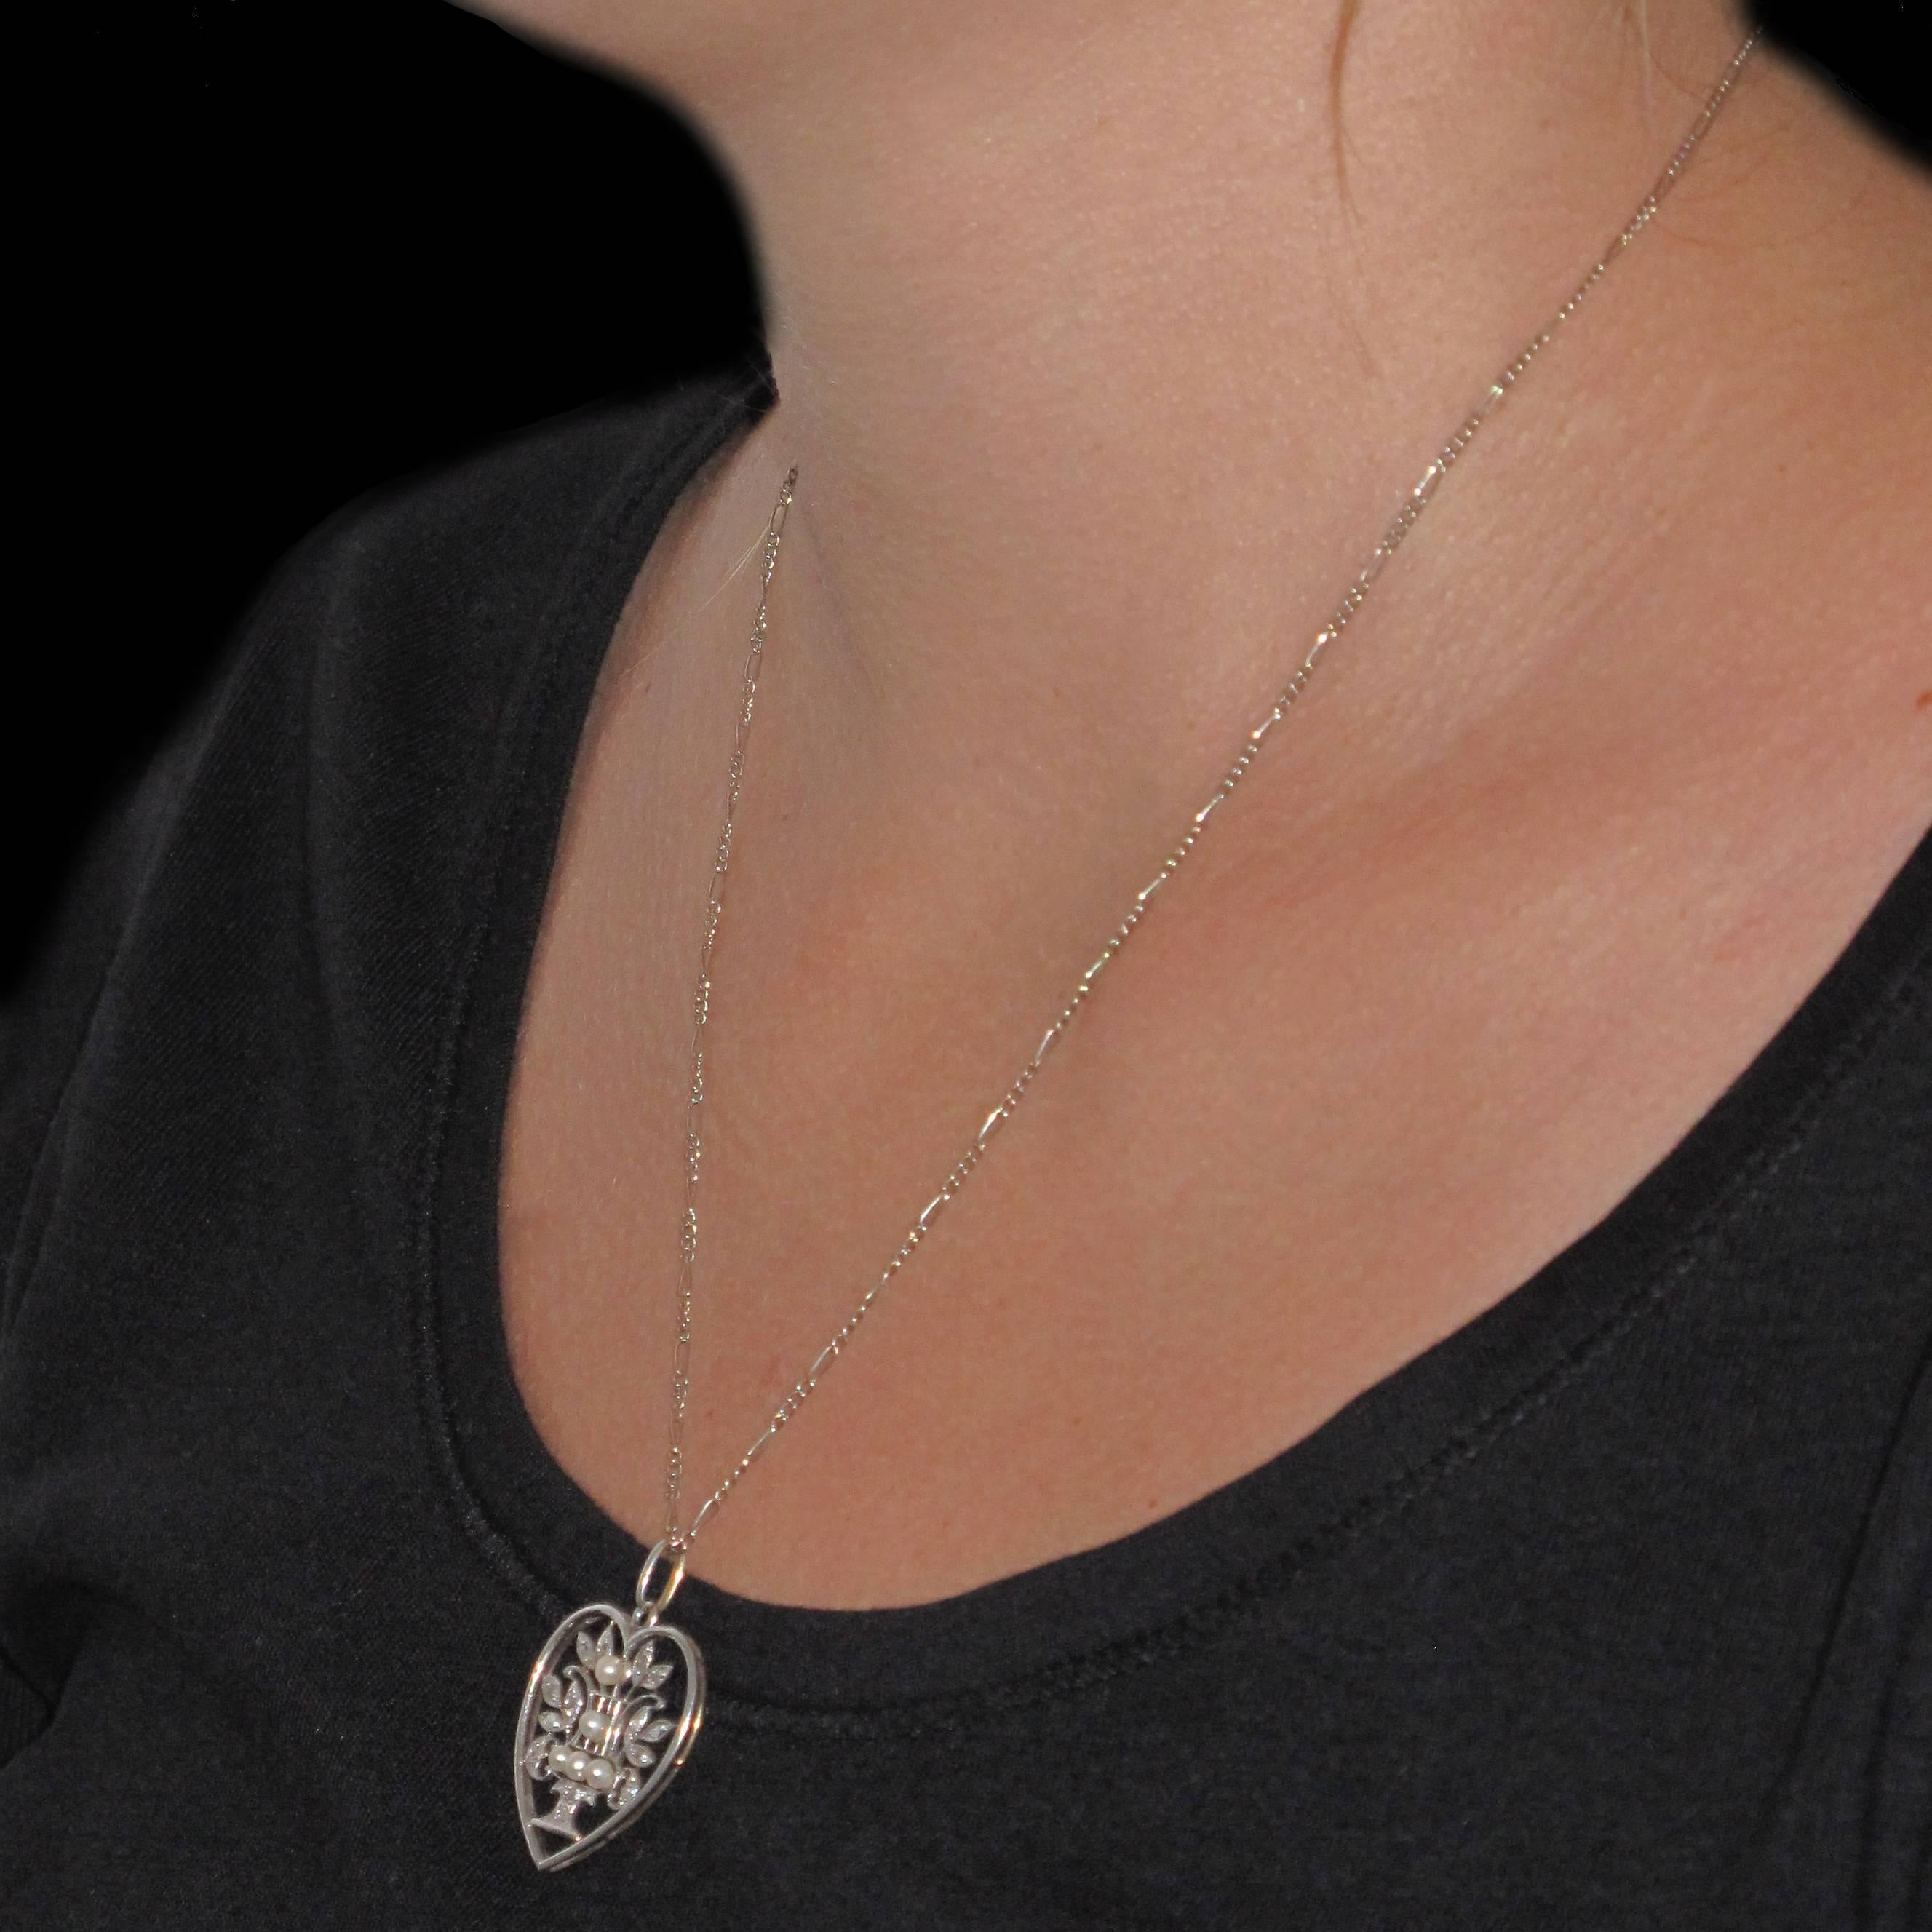 Pendant and chain in 18 carat white gold, eagle head hallmark. 
In the form of a heart, the openwork design features a vase or goblet set with fine pearls and diamonds surrounded by leaves set with diamonds. The pendant is on a curb chain. 
Chain